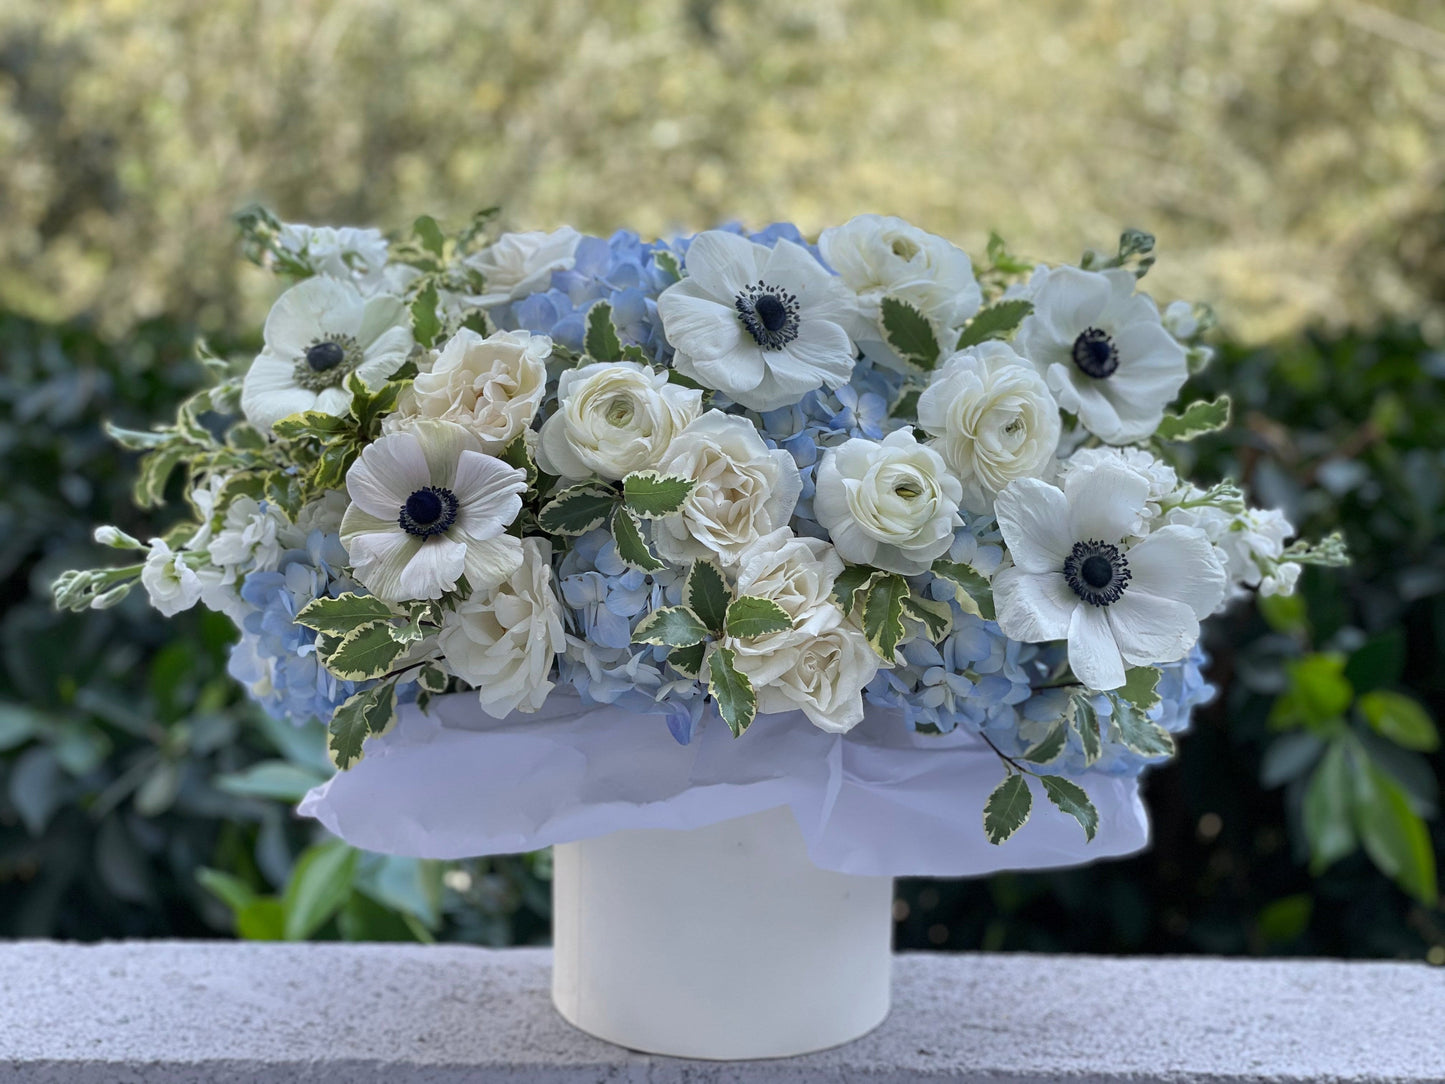 Box N.2 Blue hydrangea with garden roses and beautiful anemones